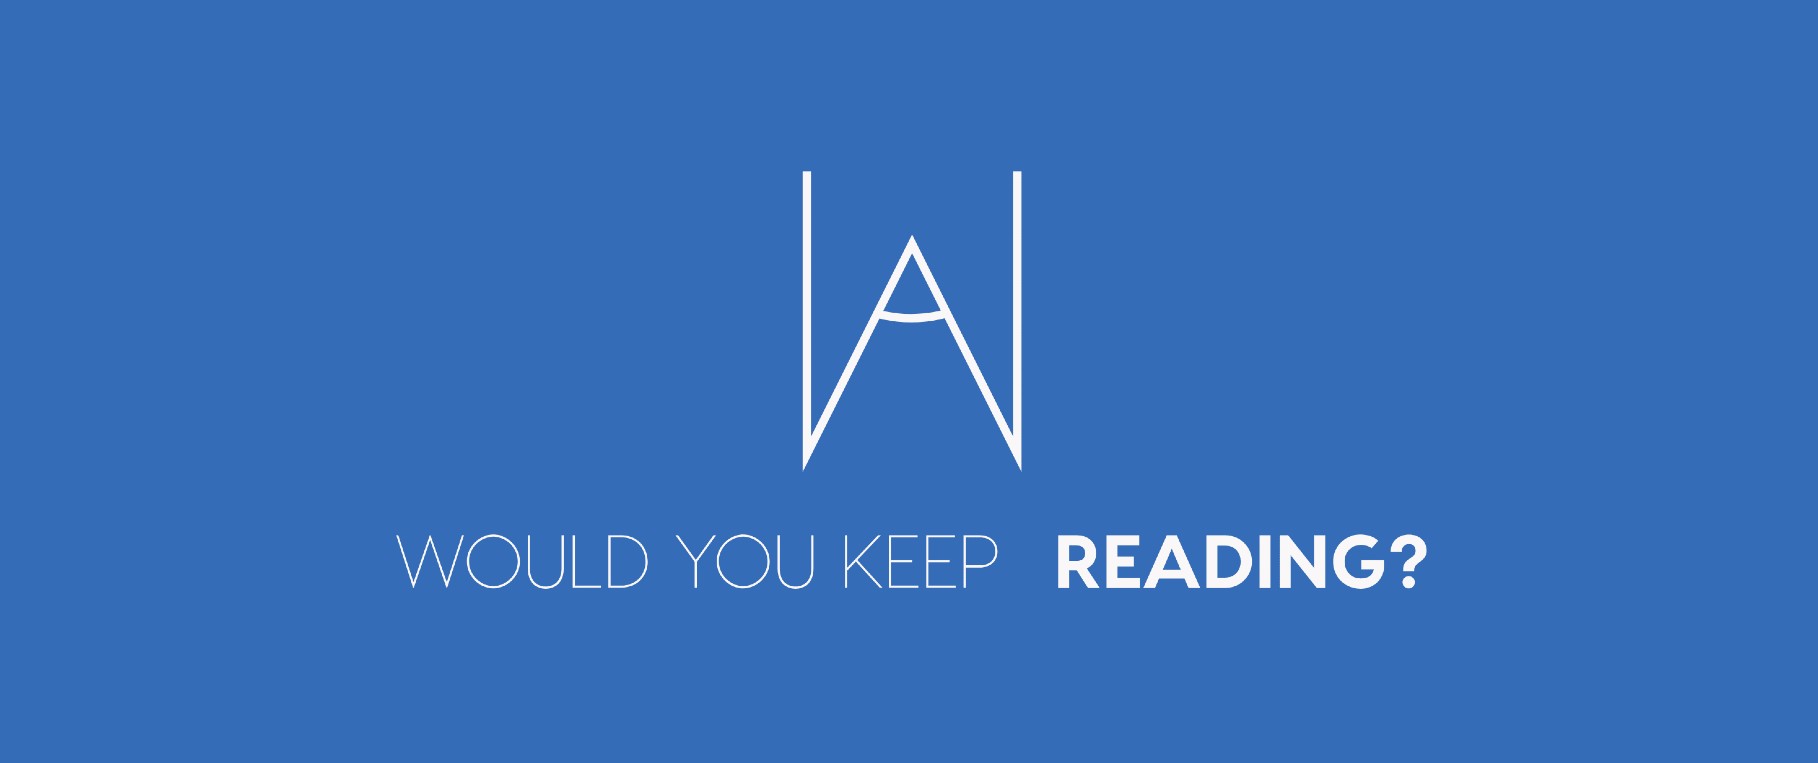 Would You Keep Reading?